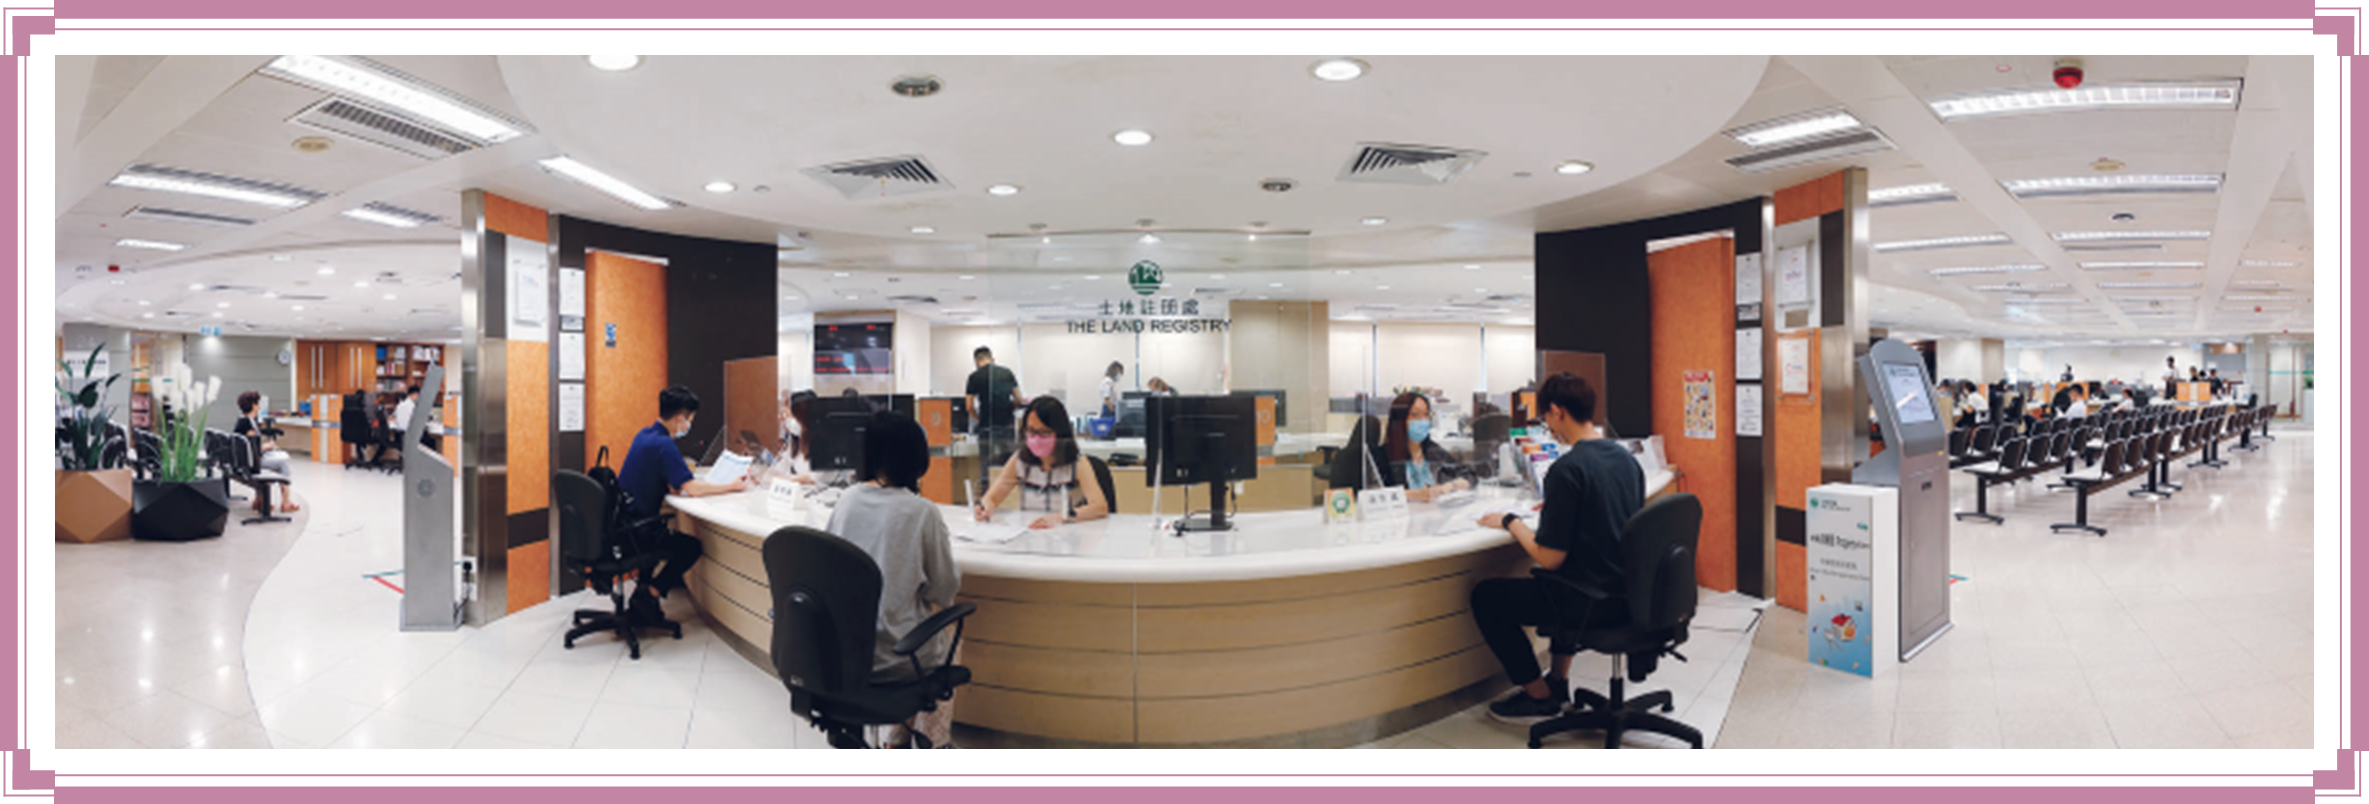 Customer Centre in Queensway with registration and search services